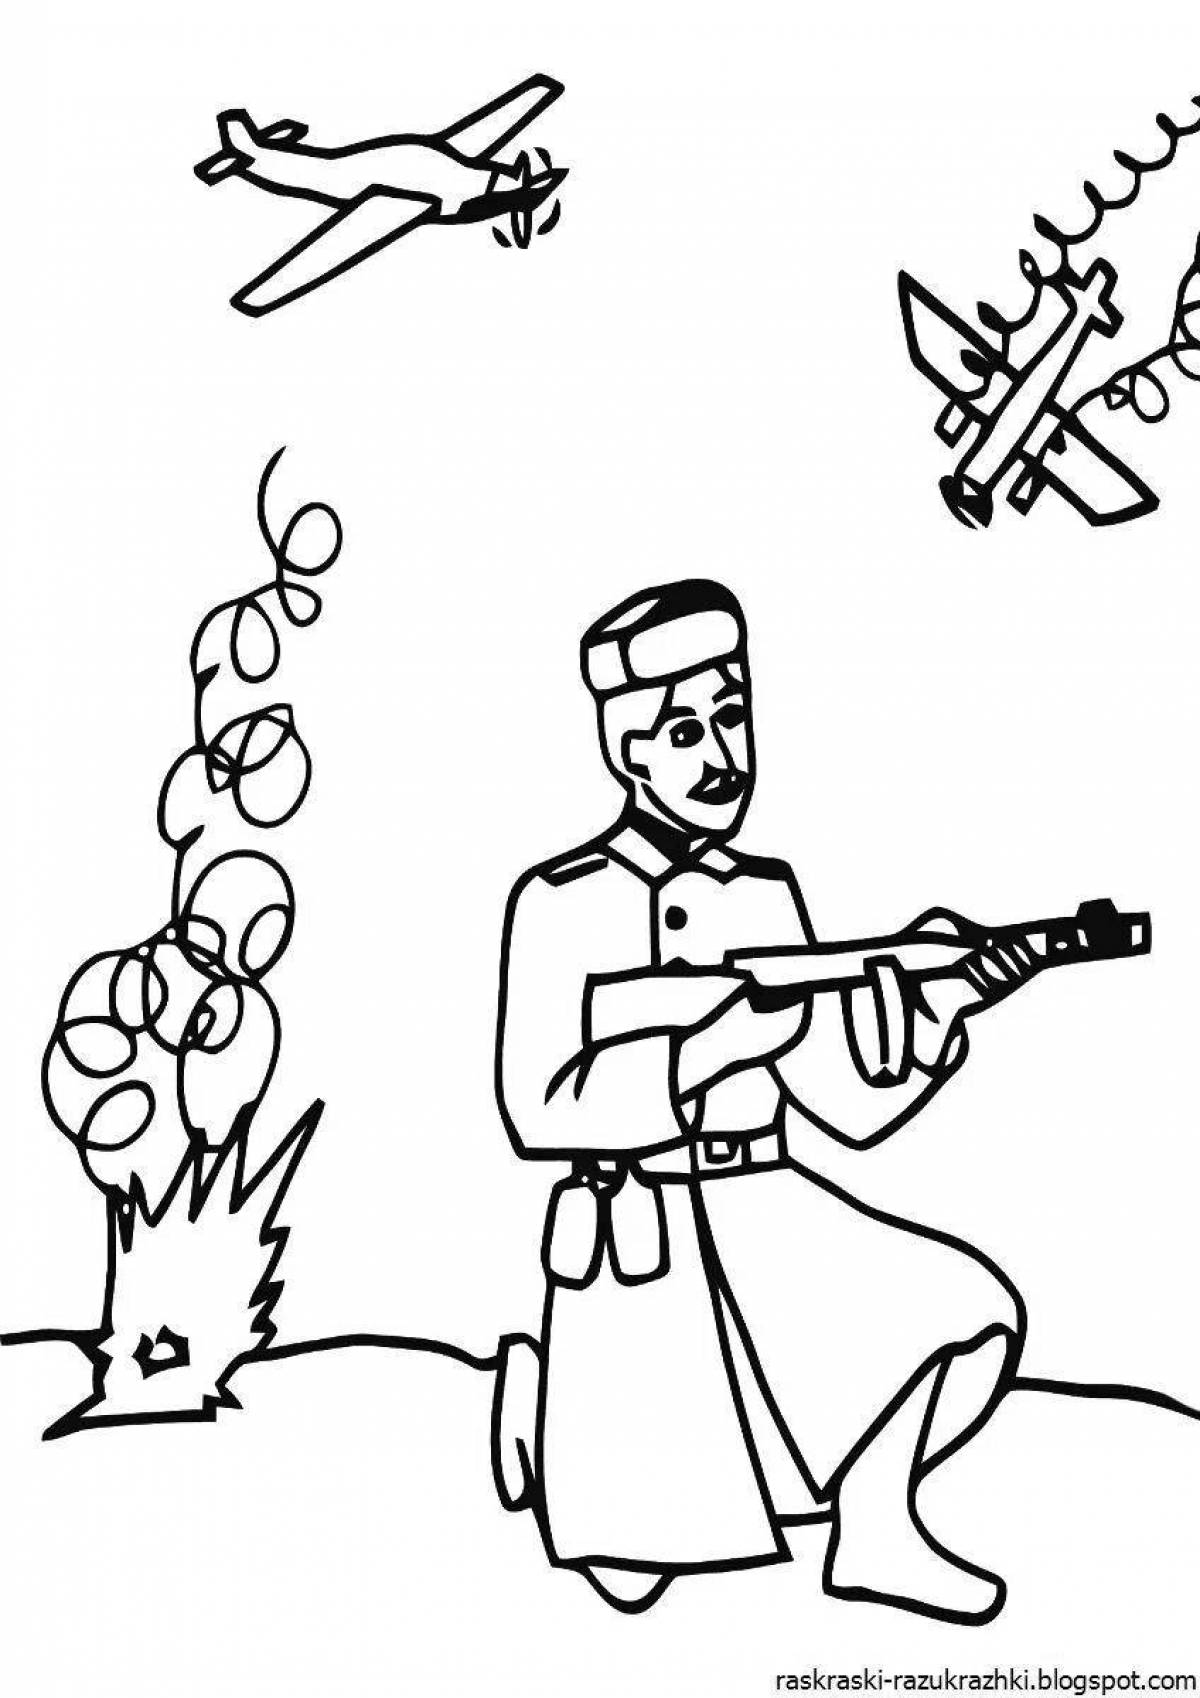 Creative war coloring book for 6-7 year olds